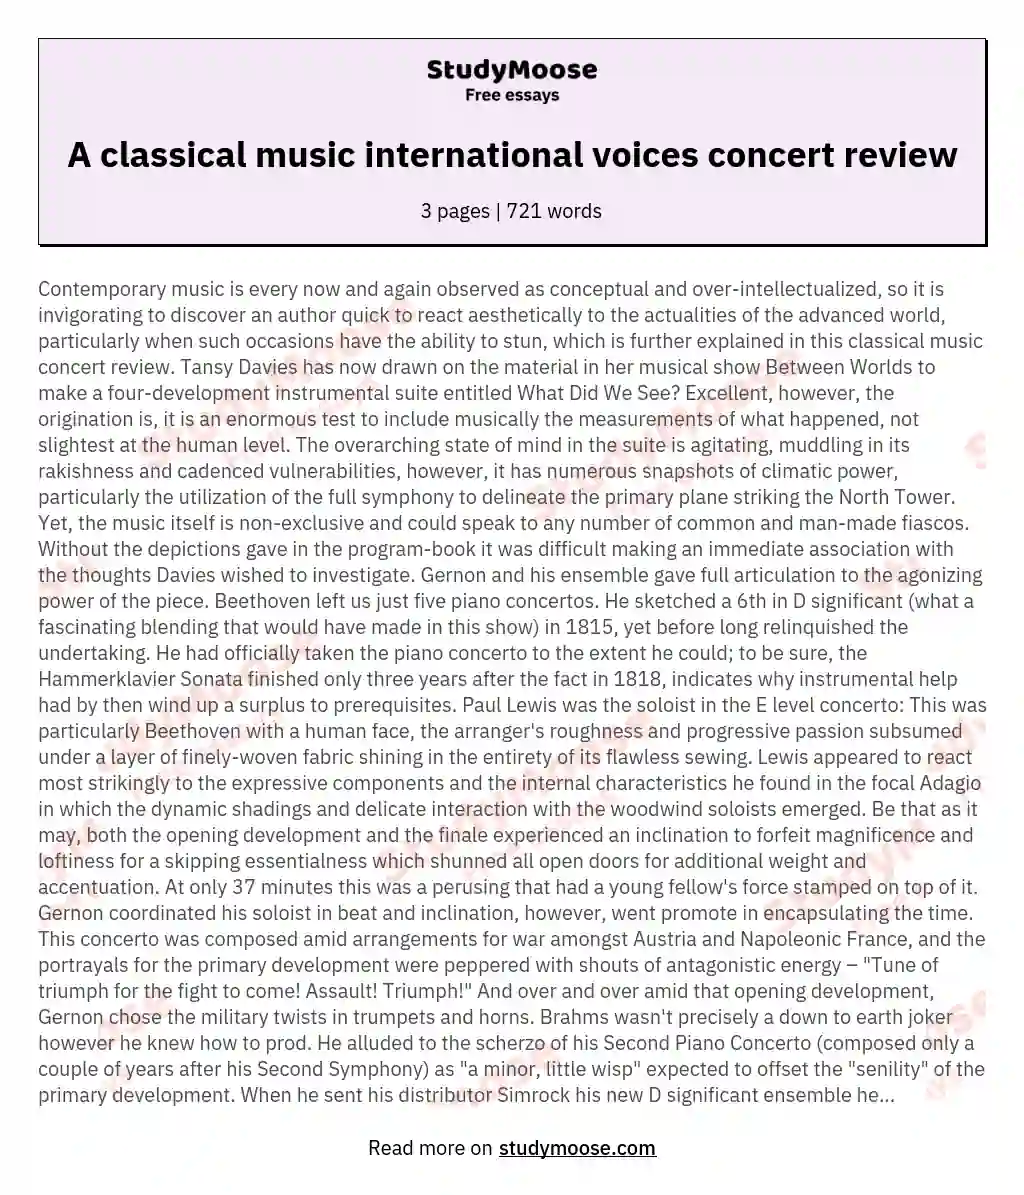 A classical music international voices concert review